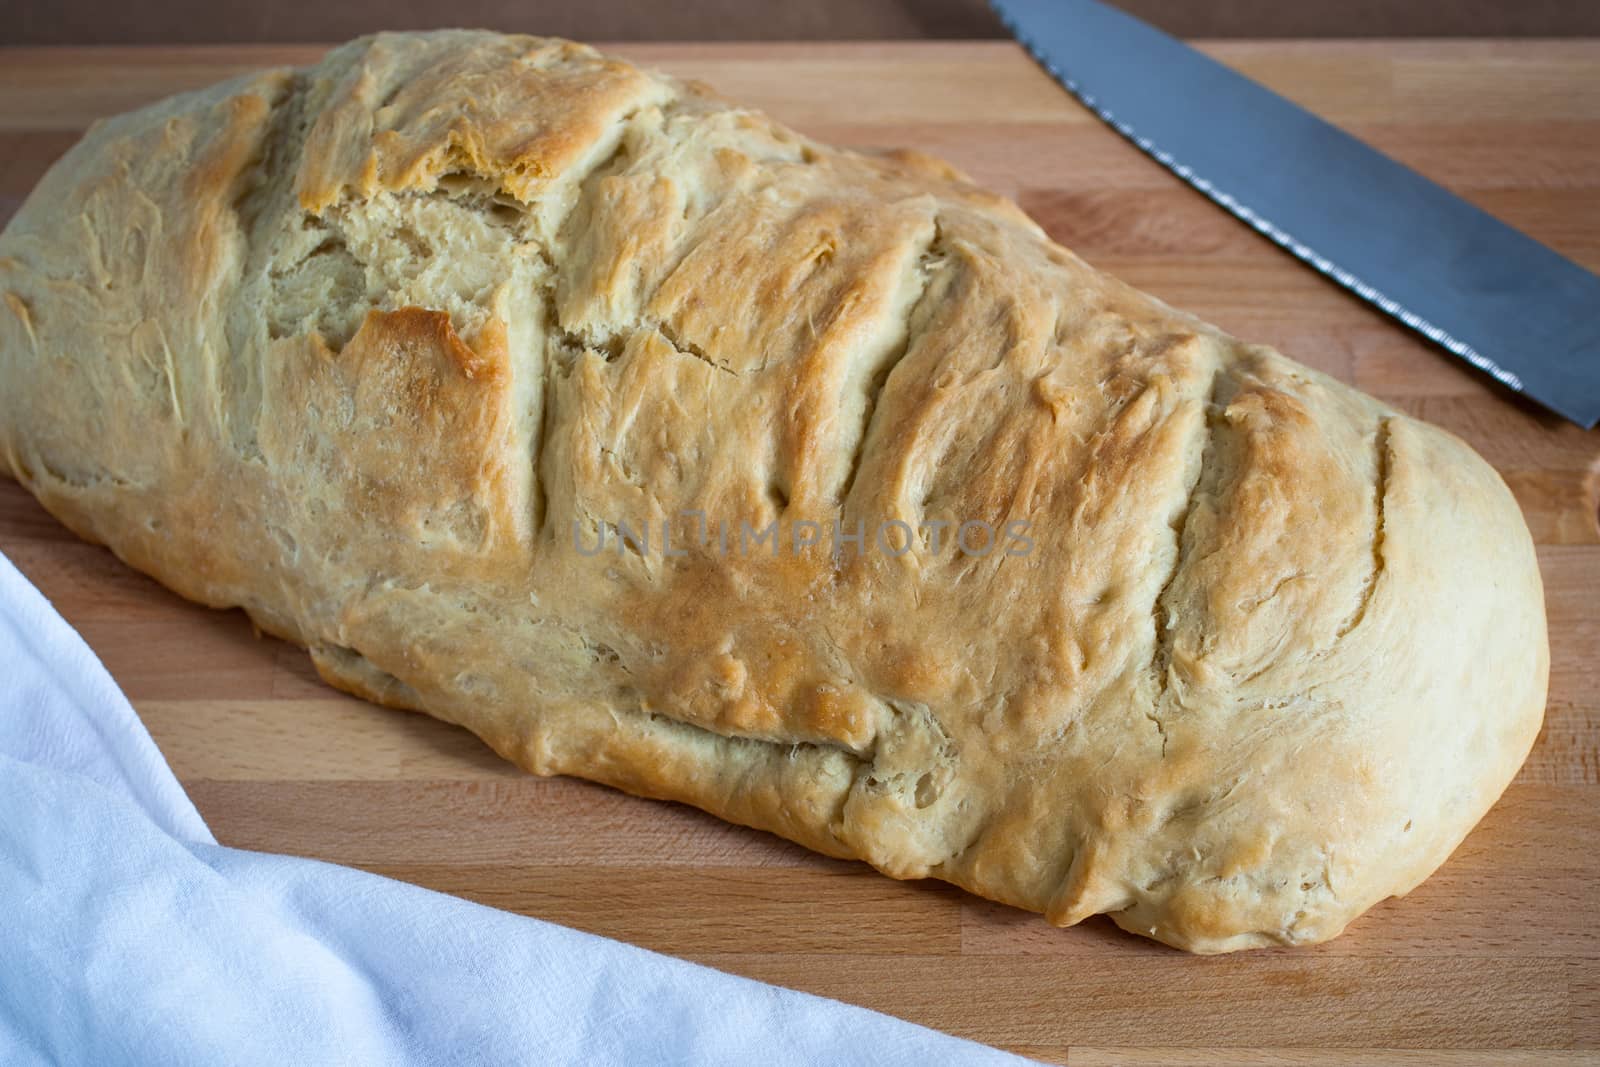 Homemade bread cooling on a cutting board with a knife and white kitchen towel nearby.